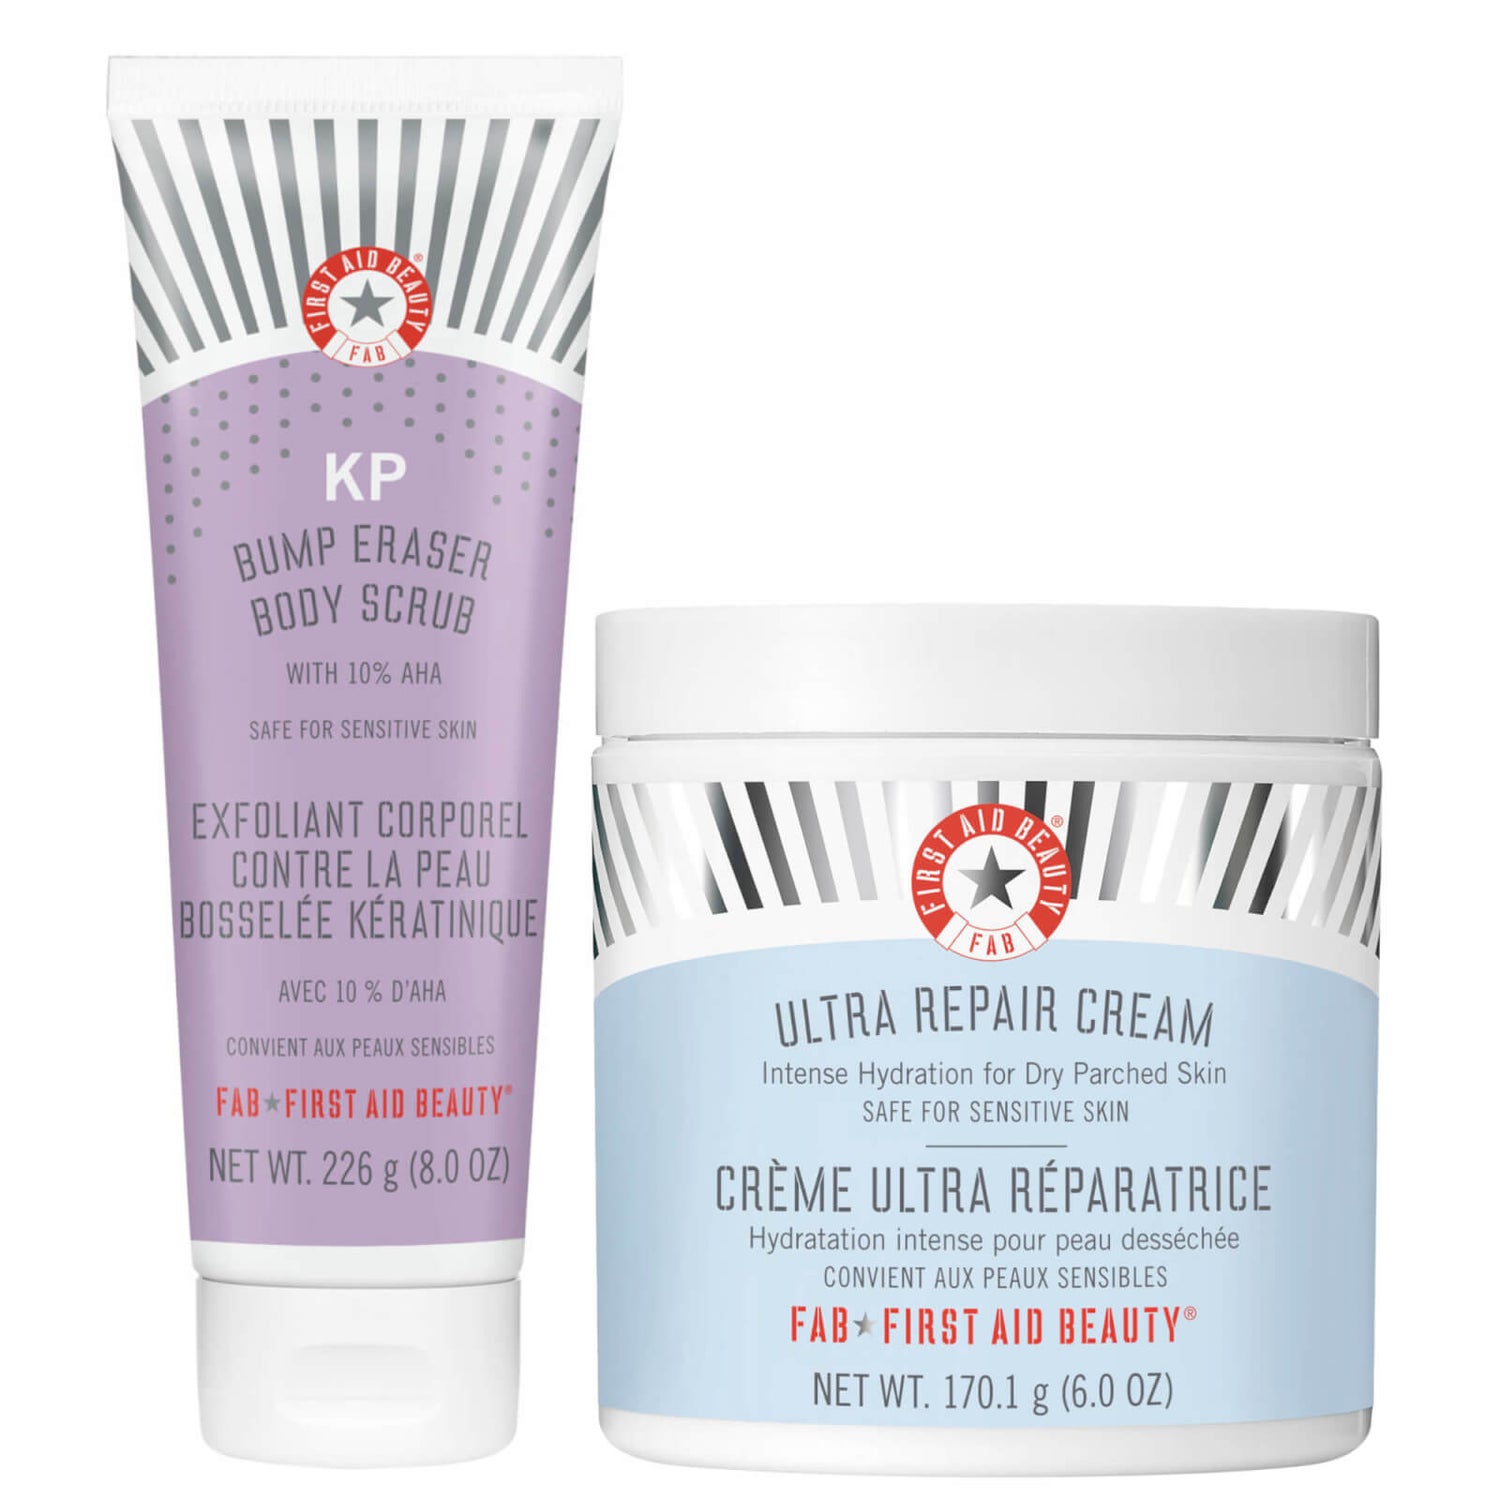 First Aid Beauty Face and Body Bundle - FREE Delivery